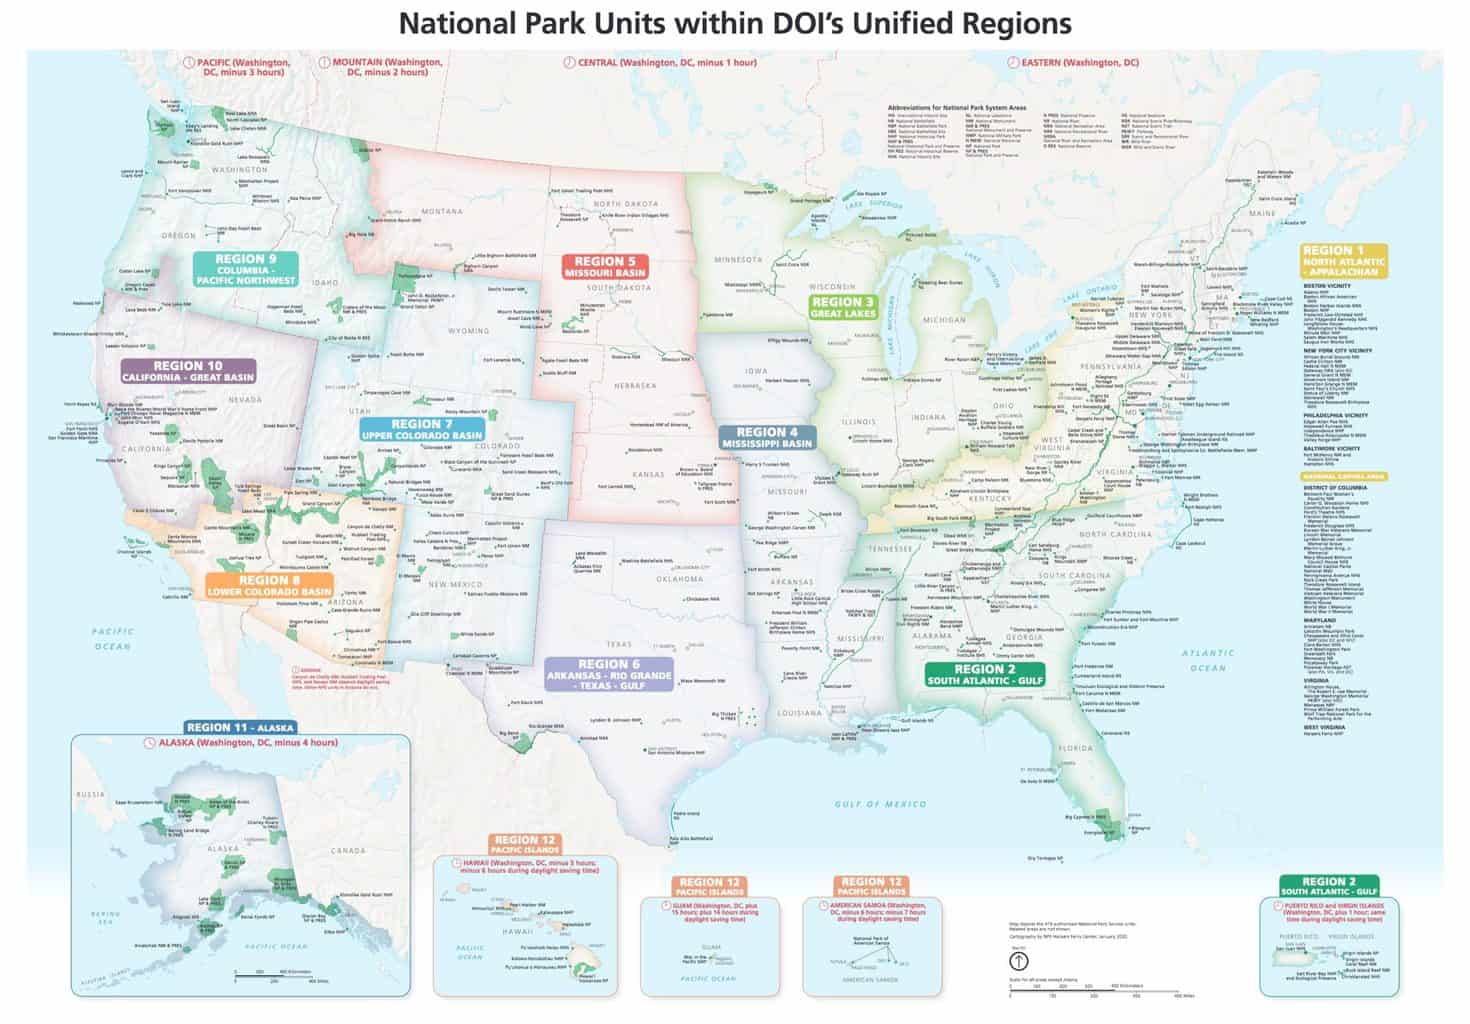 National Park Units divided into regions of the USA.